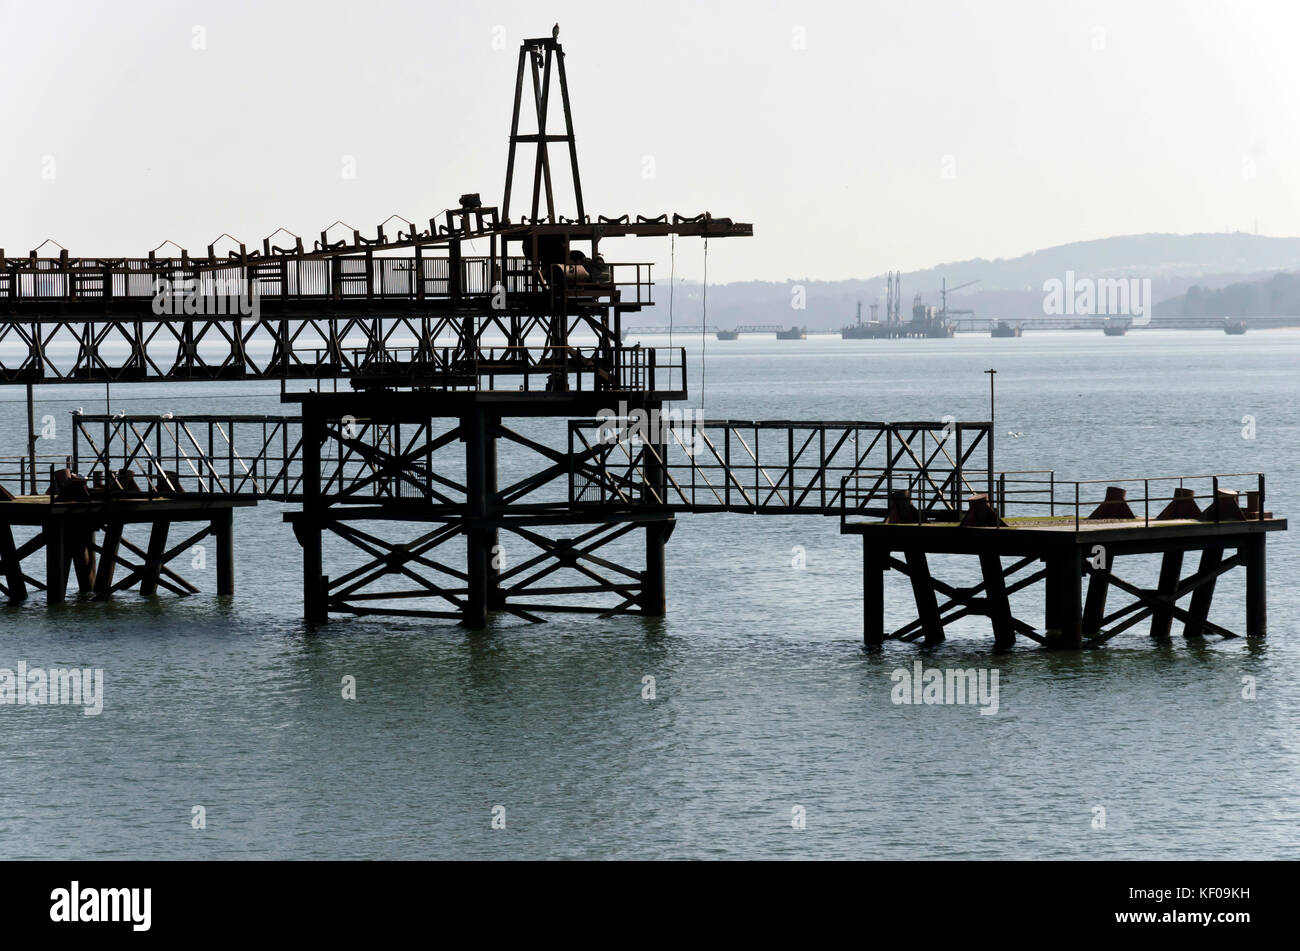 The remains of an old coal-loading pier near Inverkeithing on the Fife coast in Scotland, UK with Hound Point, an oil tanker pier beyond. Stock Photo